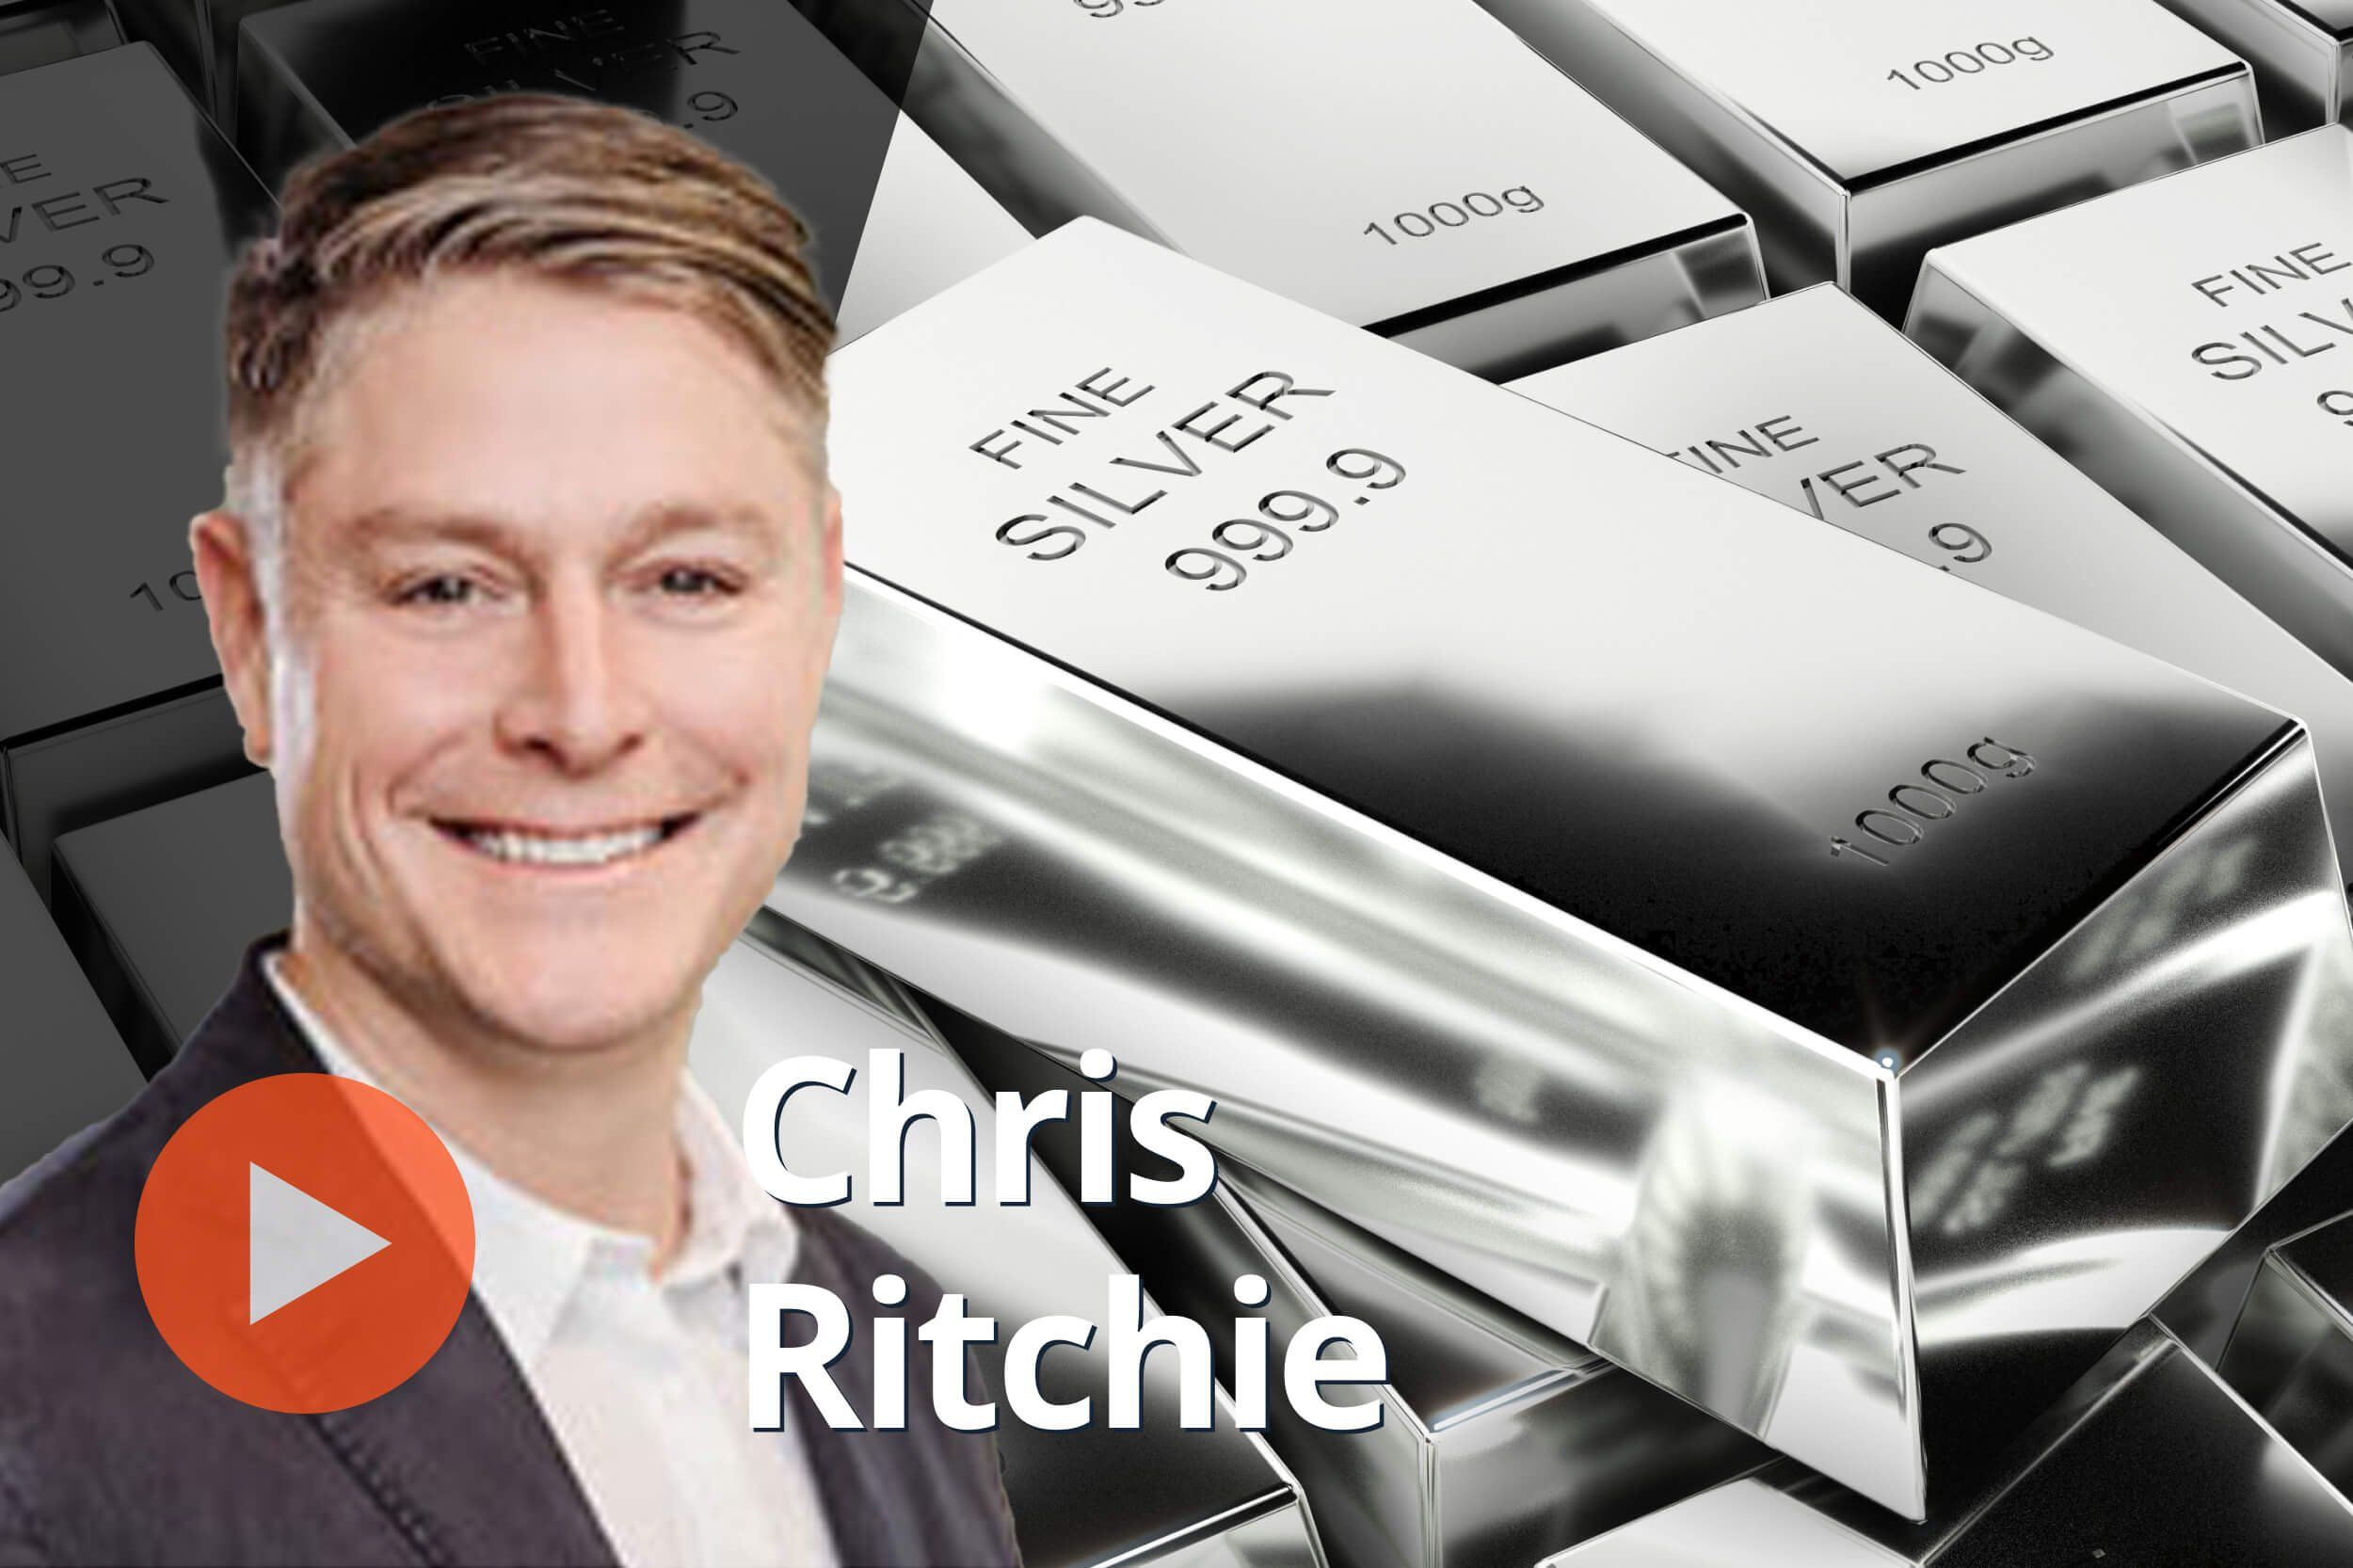 Chris Ritchie, silver bars.